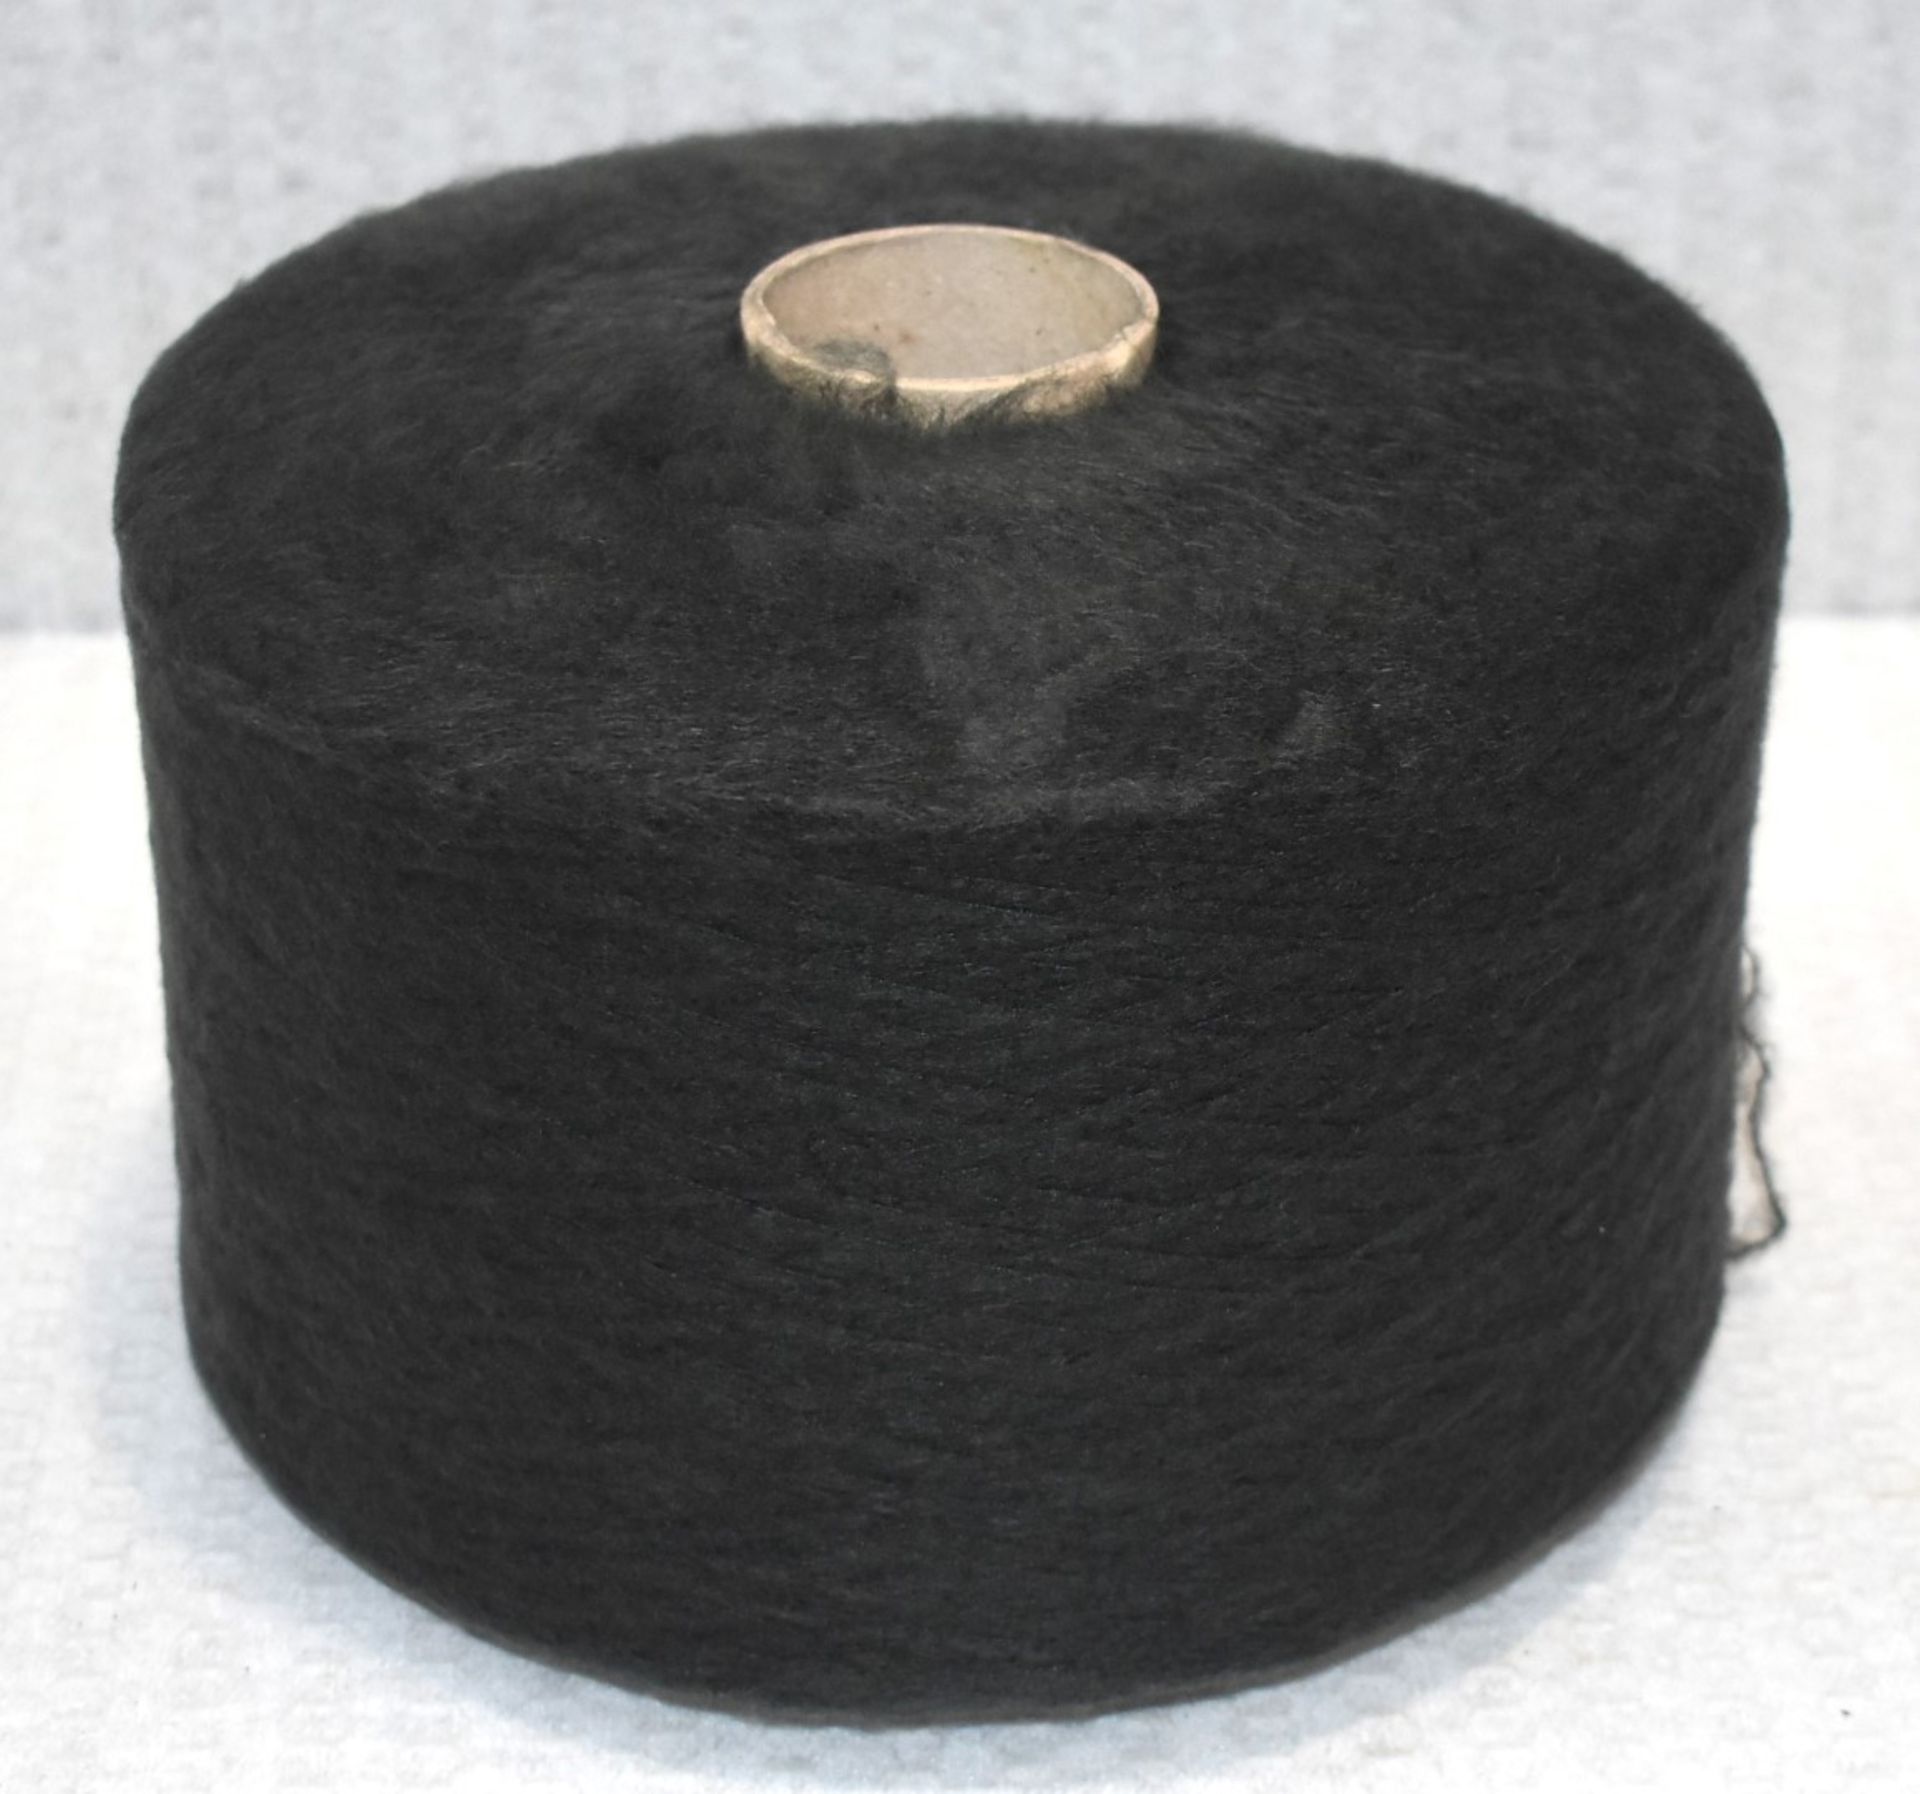 1 x Cone of 1/7,5 Lagona Knitting Yarn - Charcoal - Approx Weight: 2,300g - New Stock ABL Yarn - Image 3 of 10